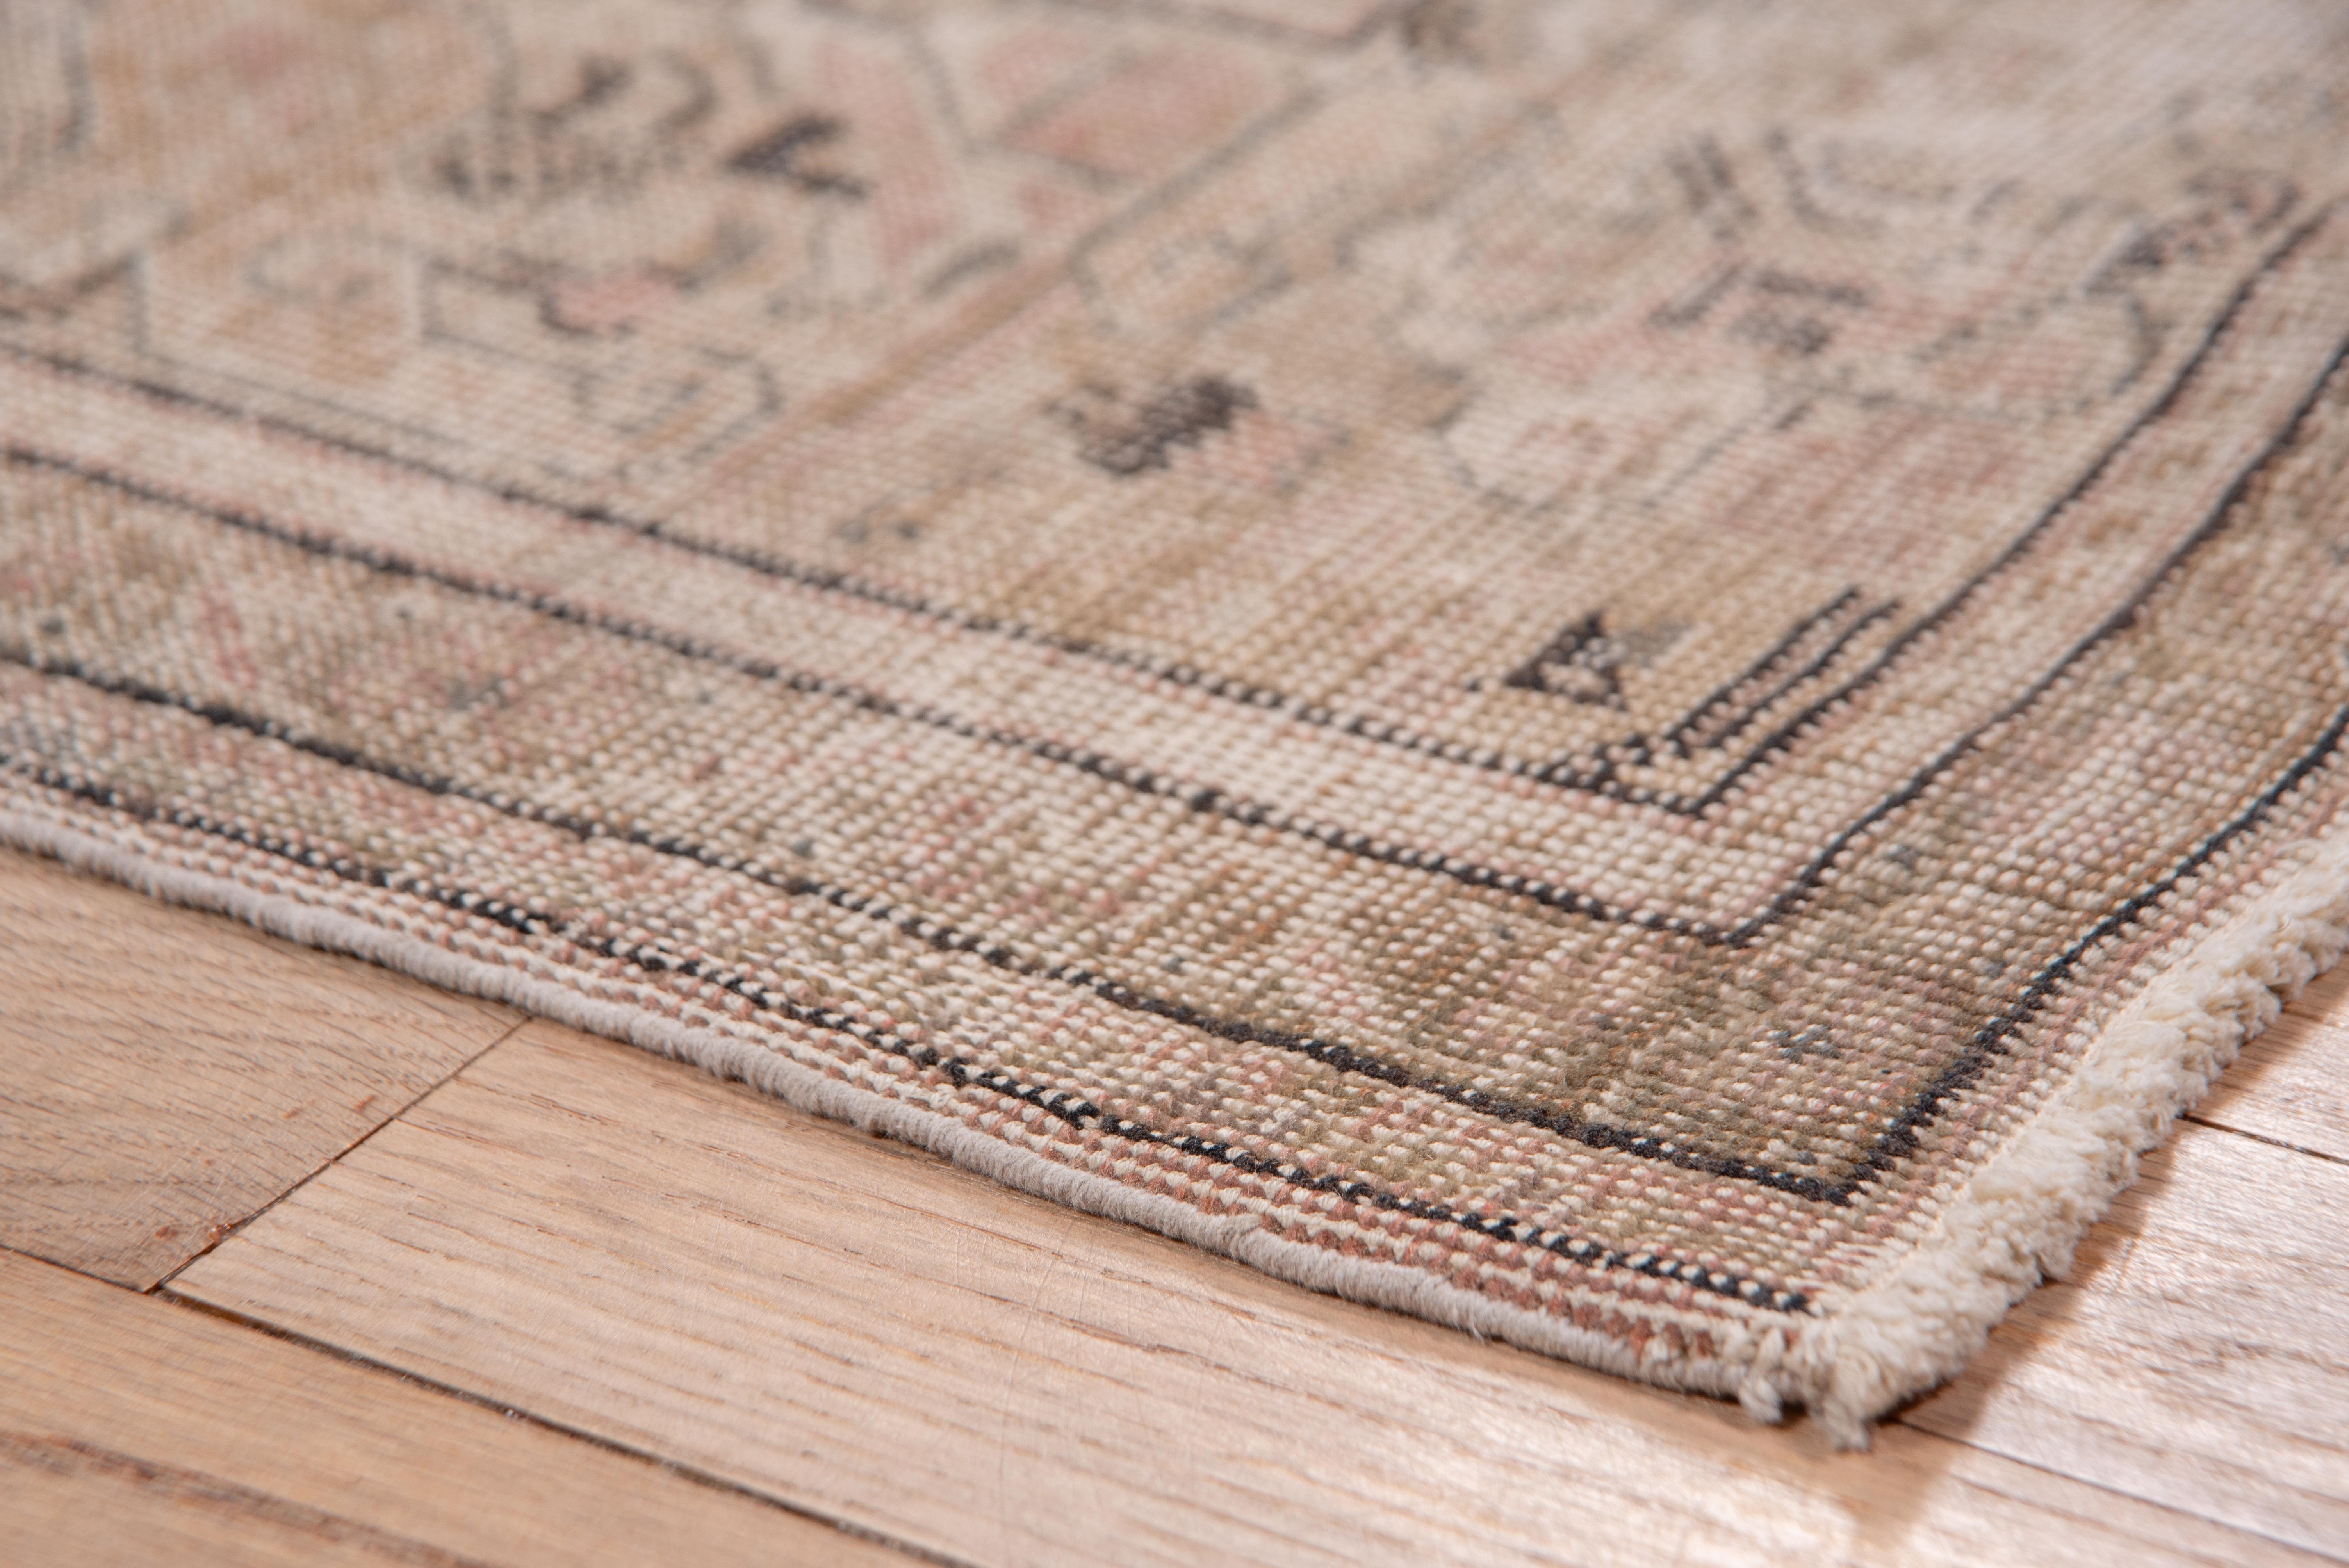 Wool Antique Kaisary Carpet with Soft Tones